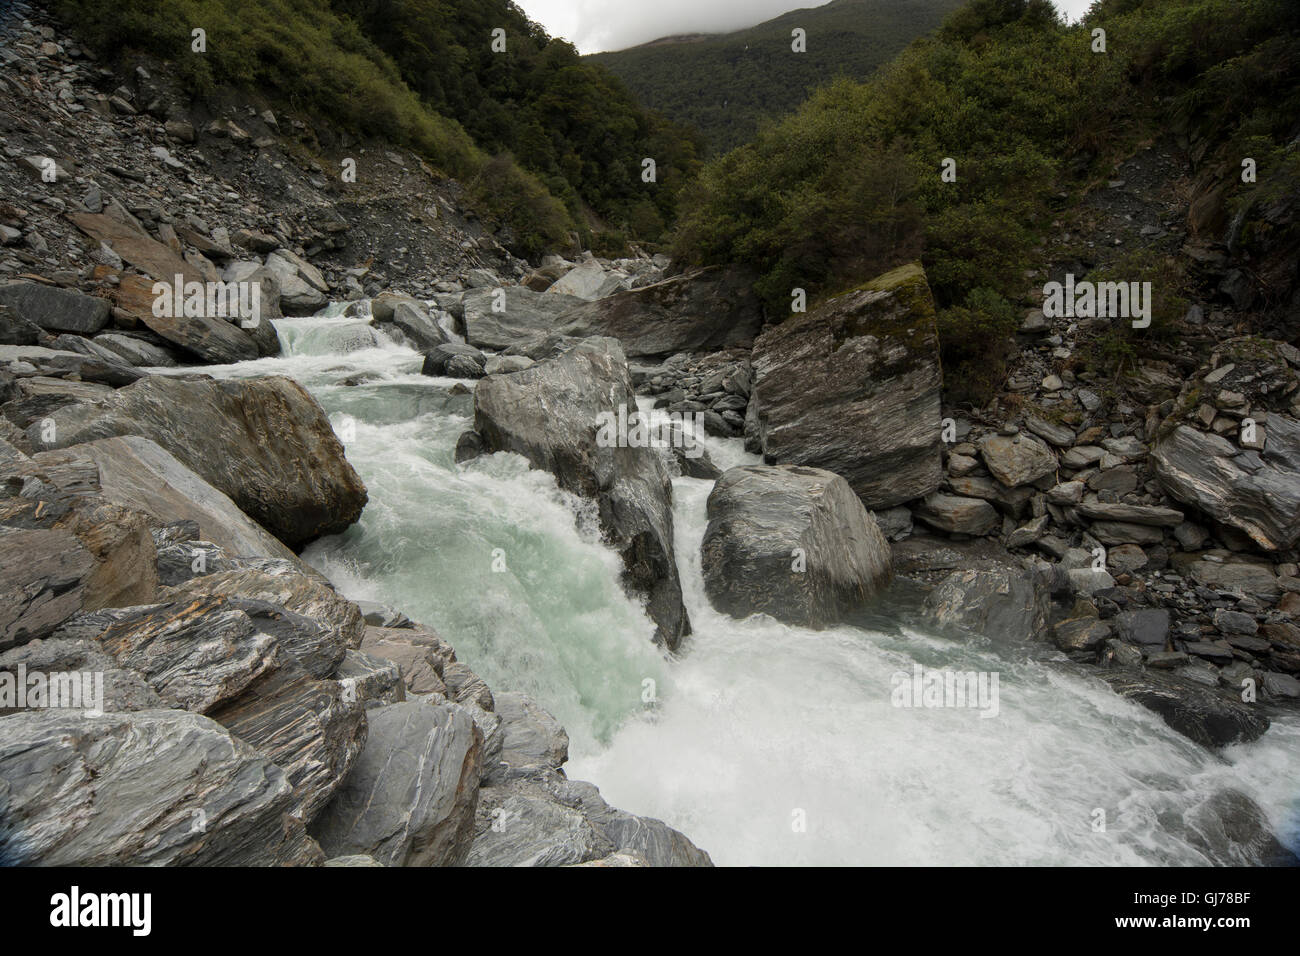 The Gates of Haast  is a tremendous gorge shaped by the Haast River in the Southern Alps. Stock Photo